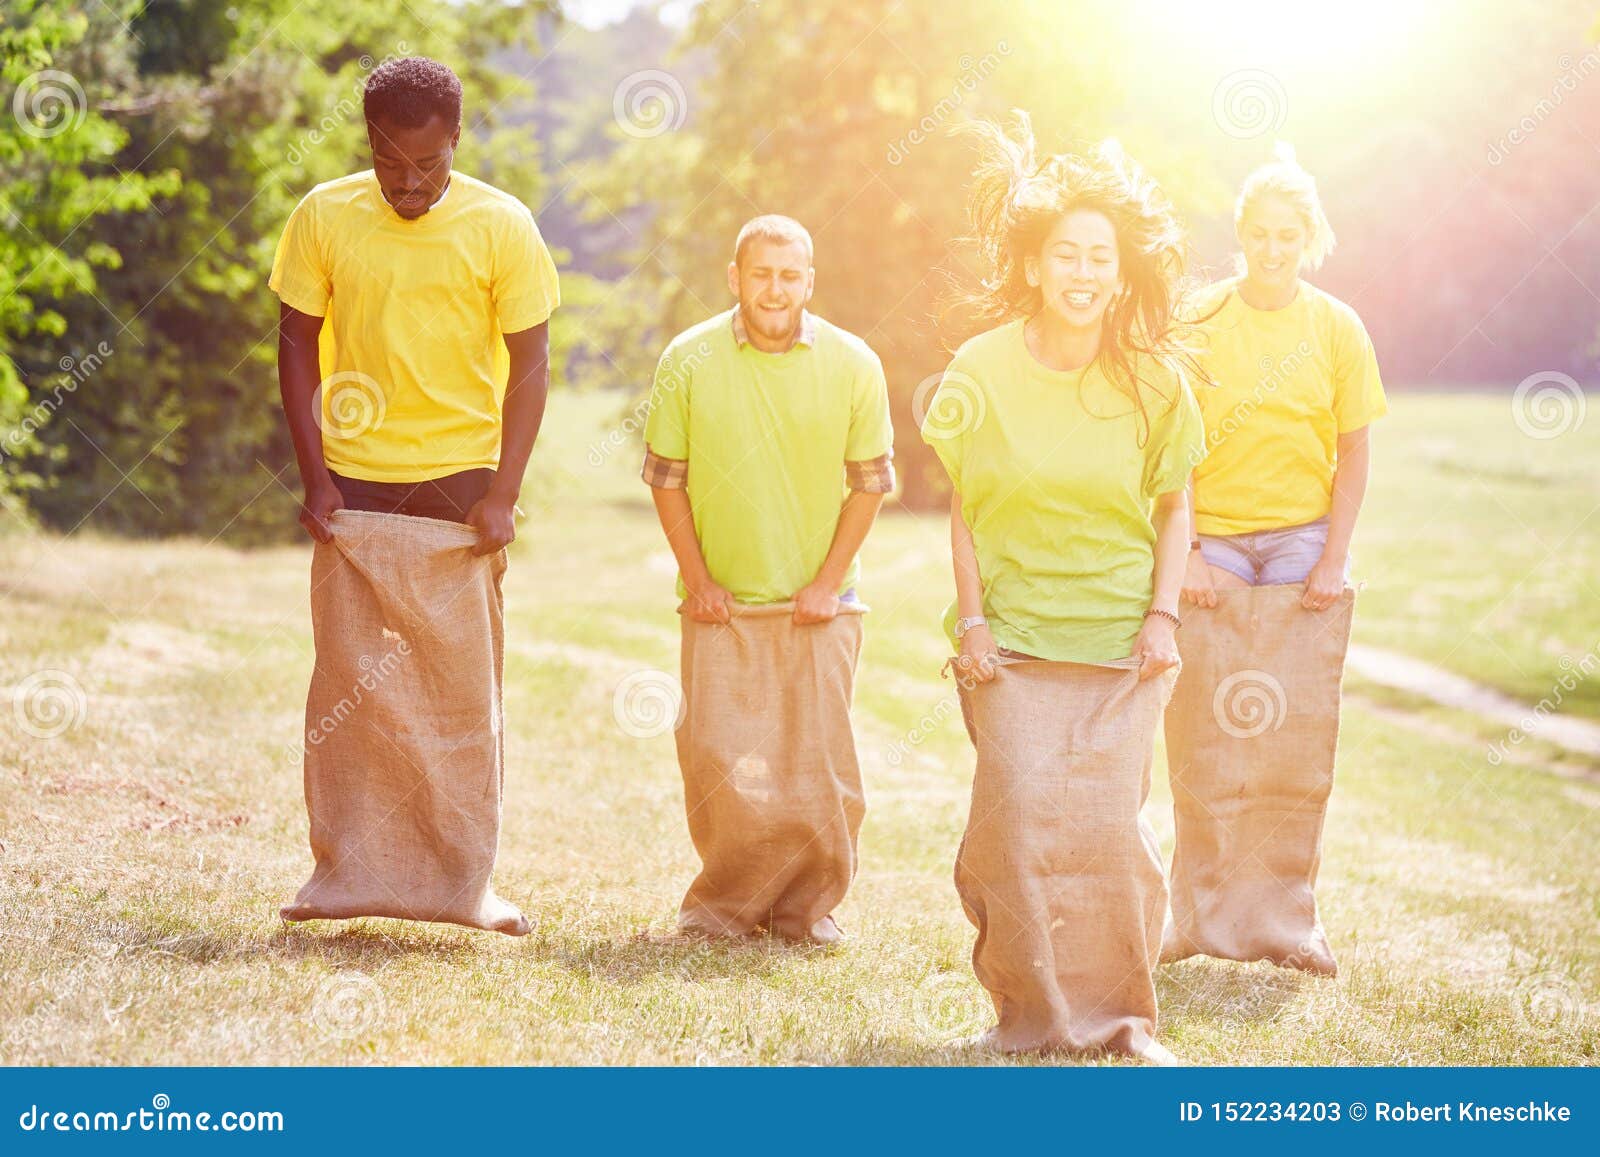 Group Makes Sack Jumping As Teambuilding Event Stock Image - Image of ...